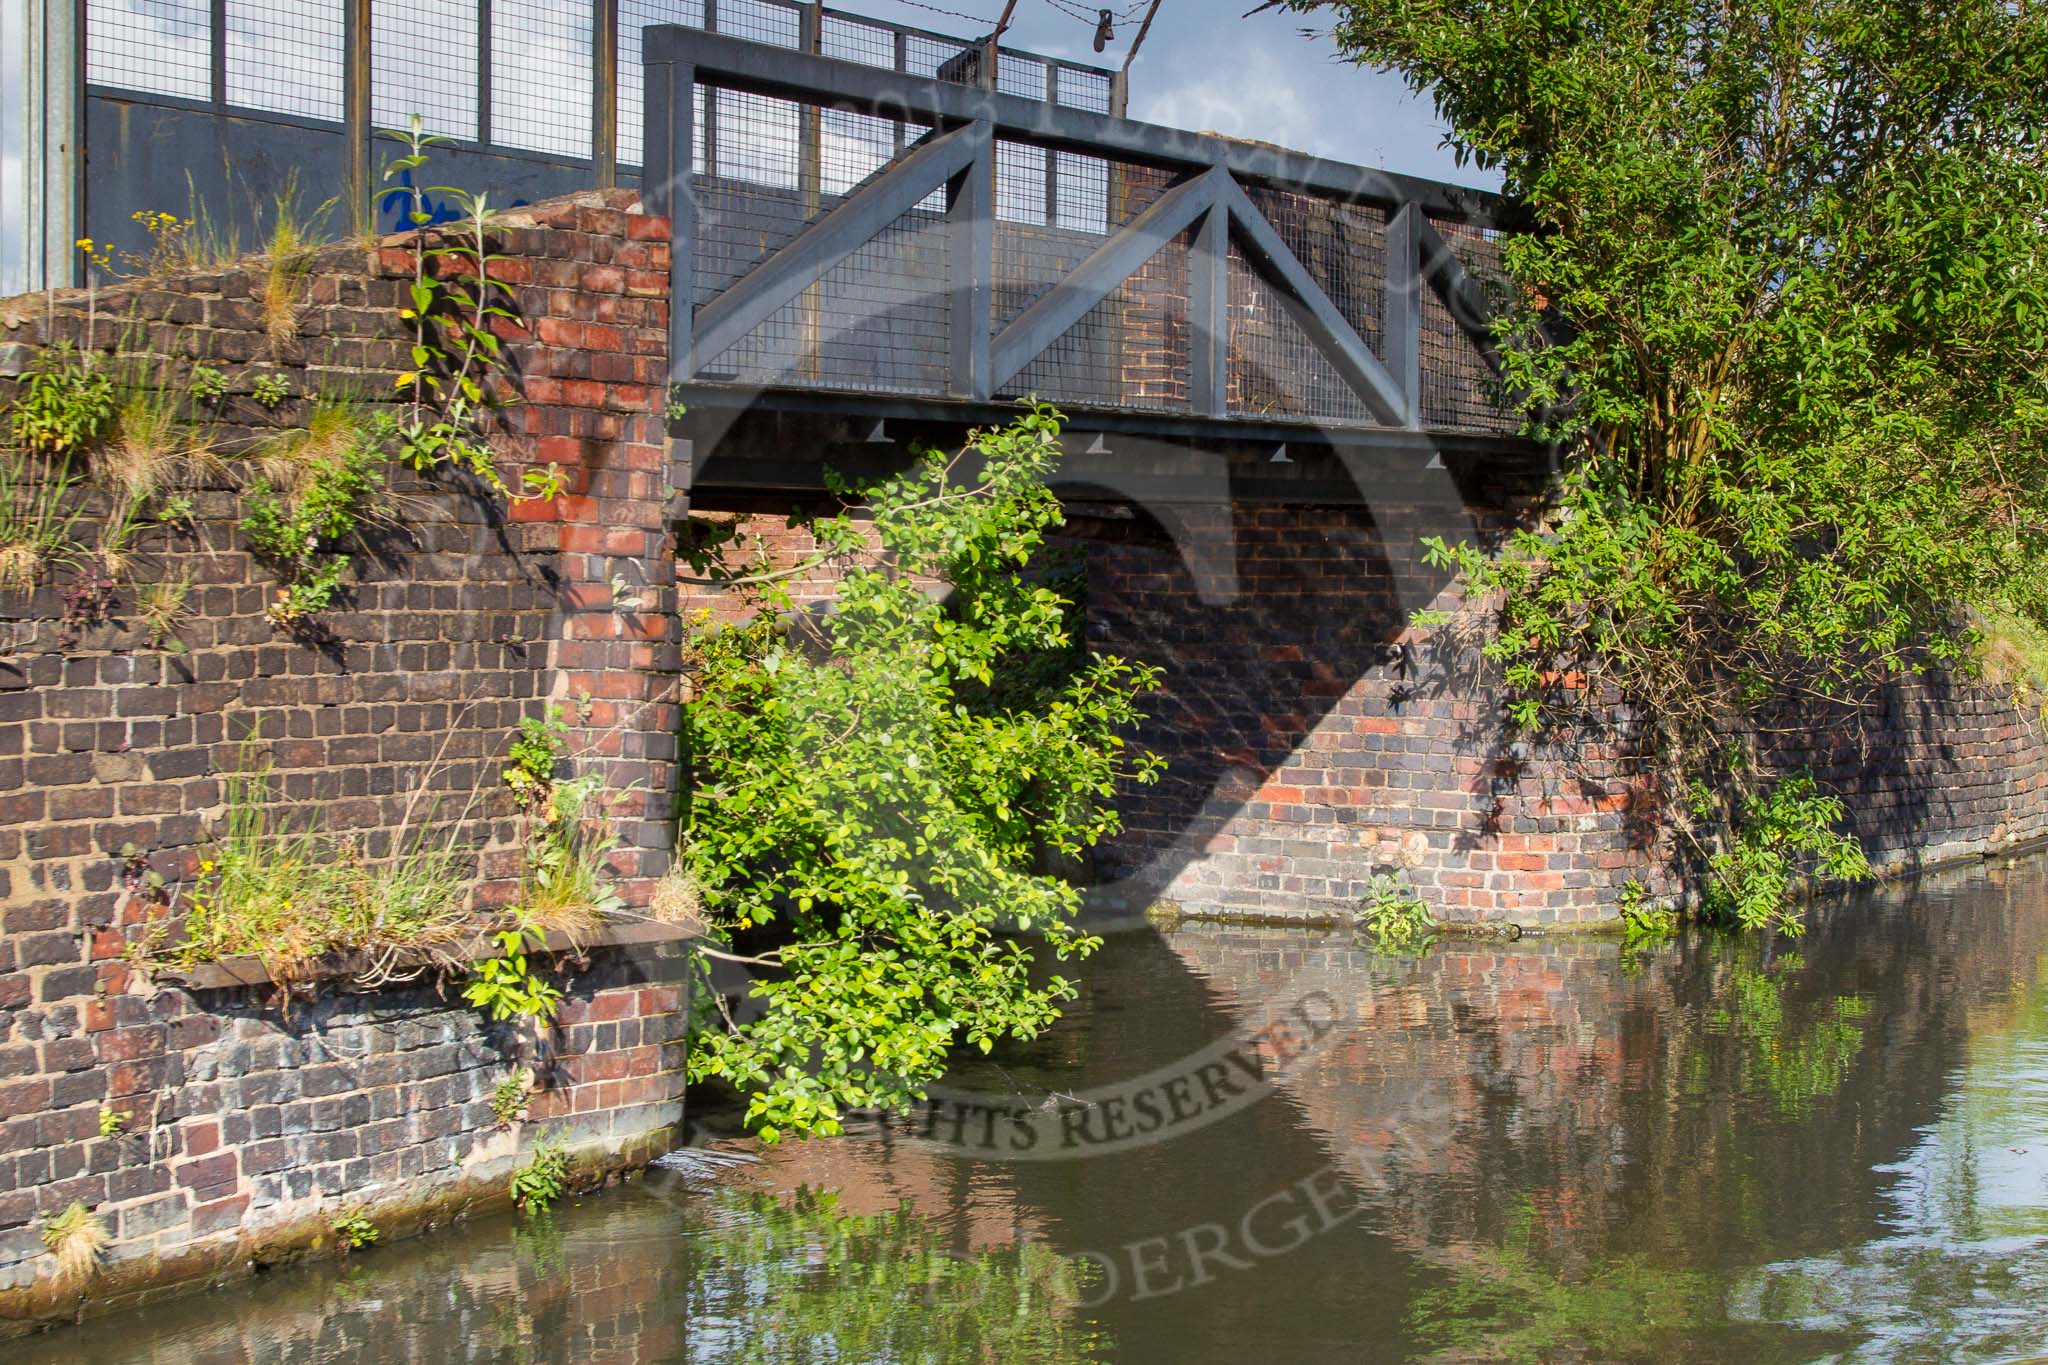 BCN Marathon Challenge 2014: Old factory bridge on the New Main Line close to Pudding Green Junction, the arm could have served Blue Brick Works.
Birmingham Canal Navigation,


United Kingdom,
on 24 May 2014 at 17:31, image #167